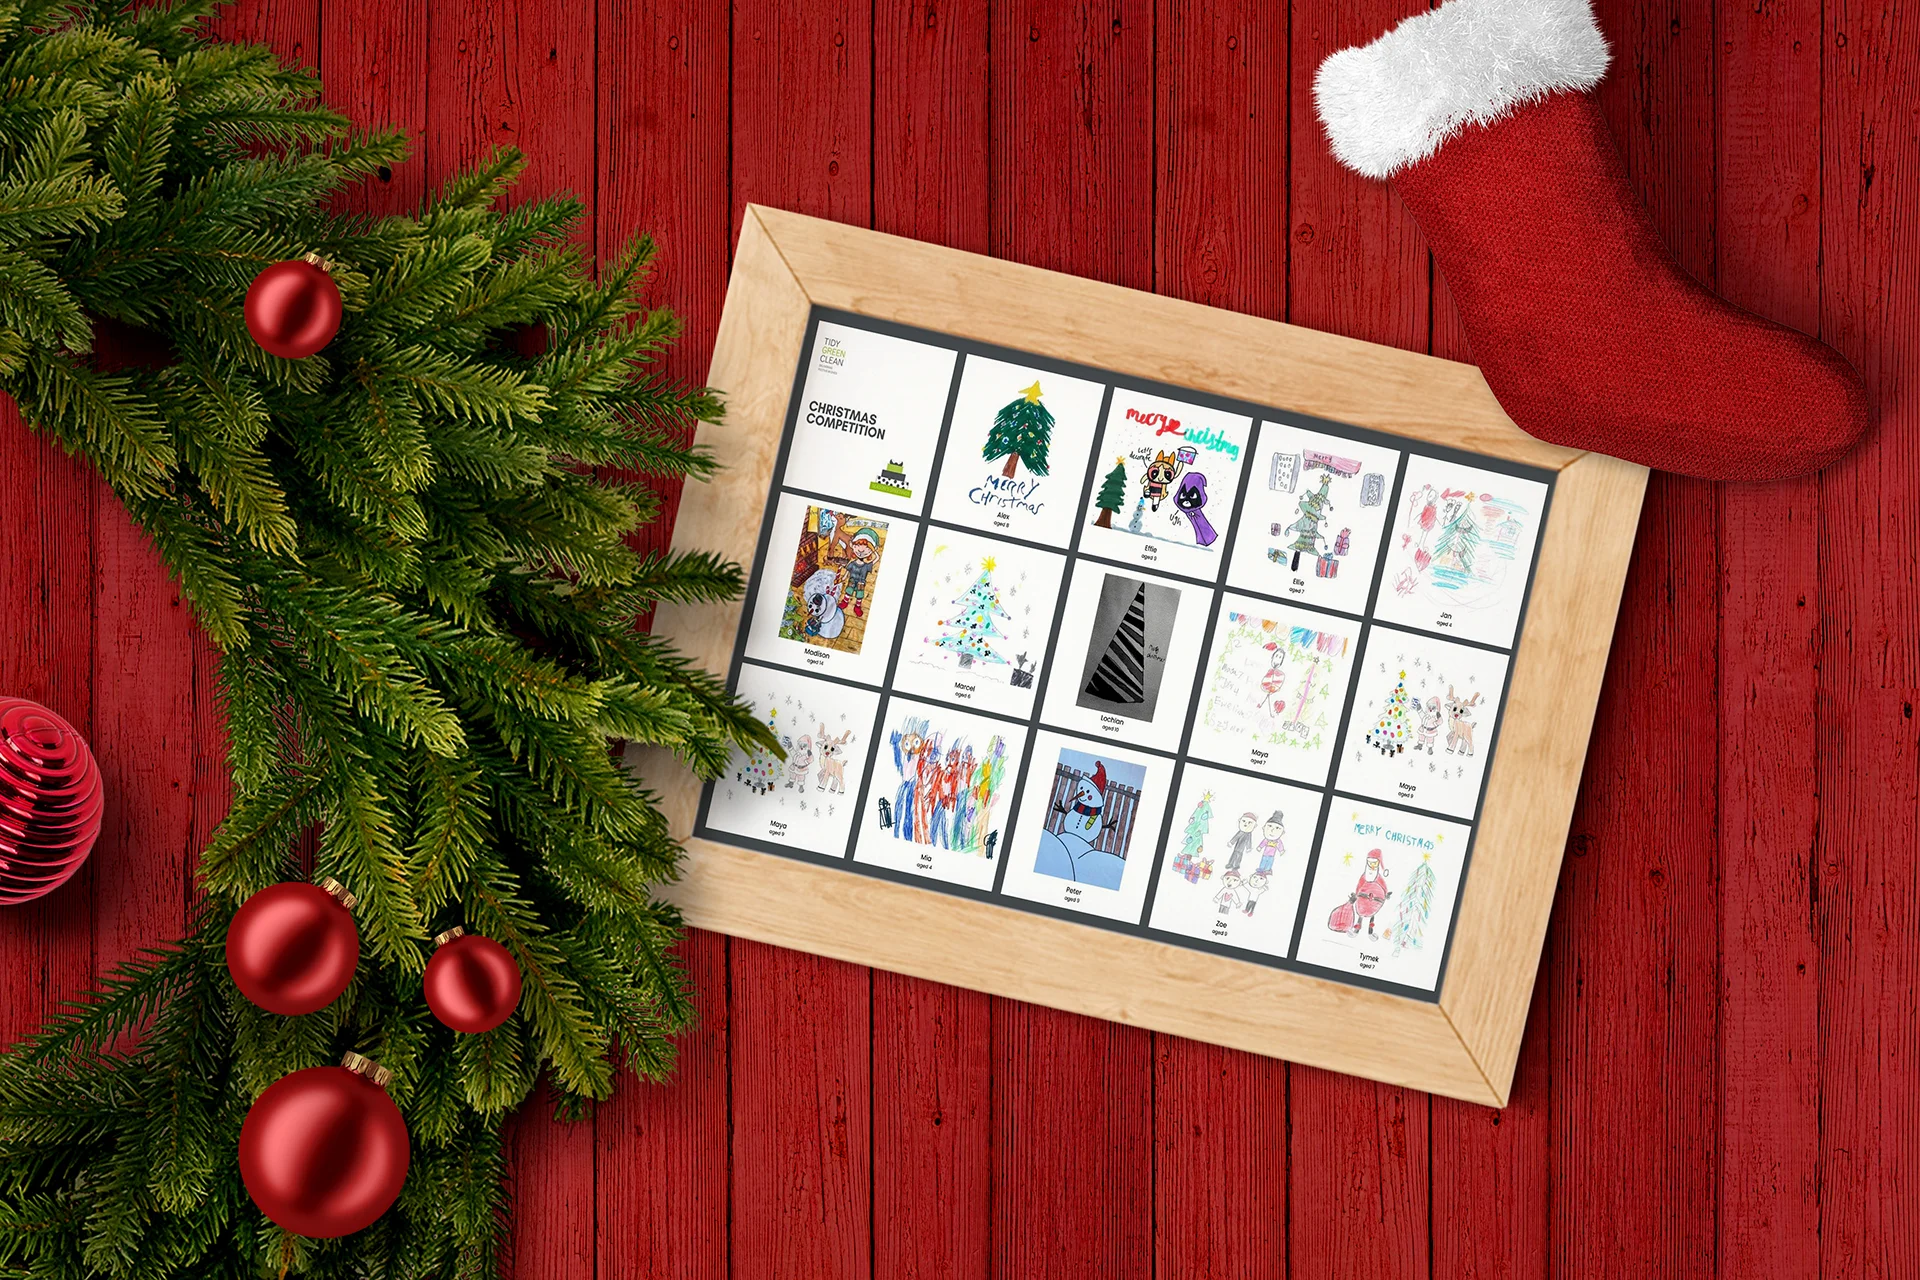 Christmas cards design contest on wooden table with decorations